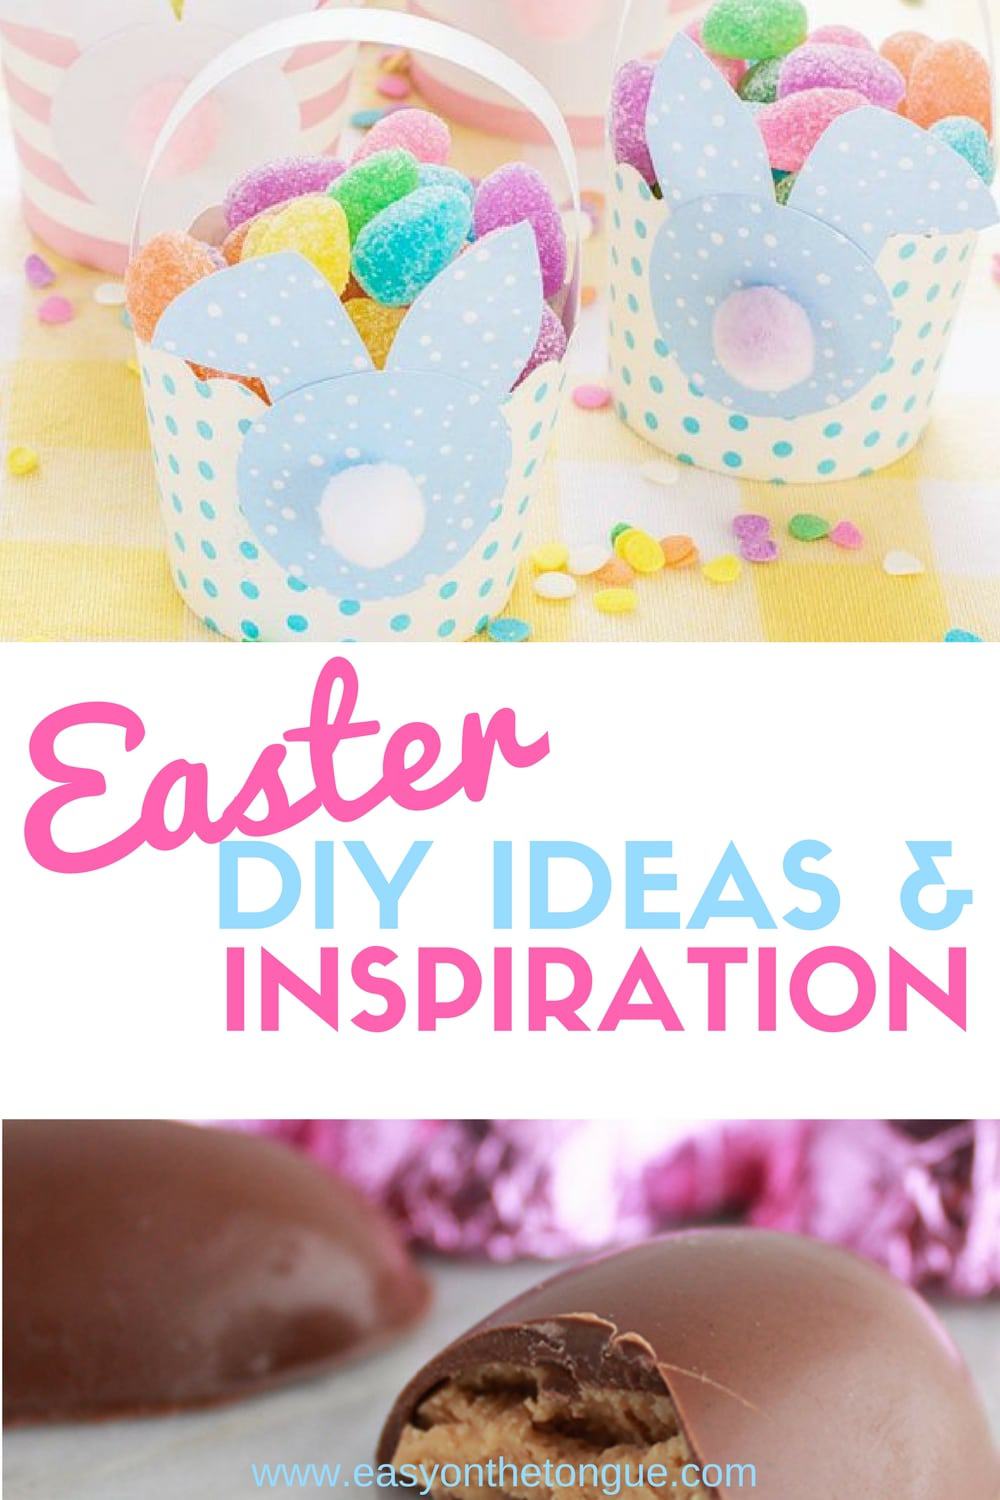 Easter DIY Ideas Inspiration Challenge – Make a frugal Easter Wreath with what you have